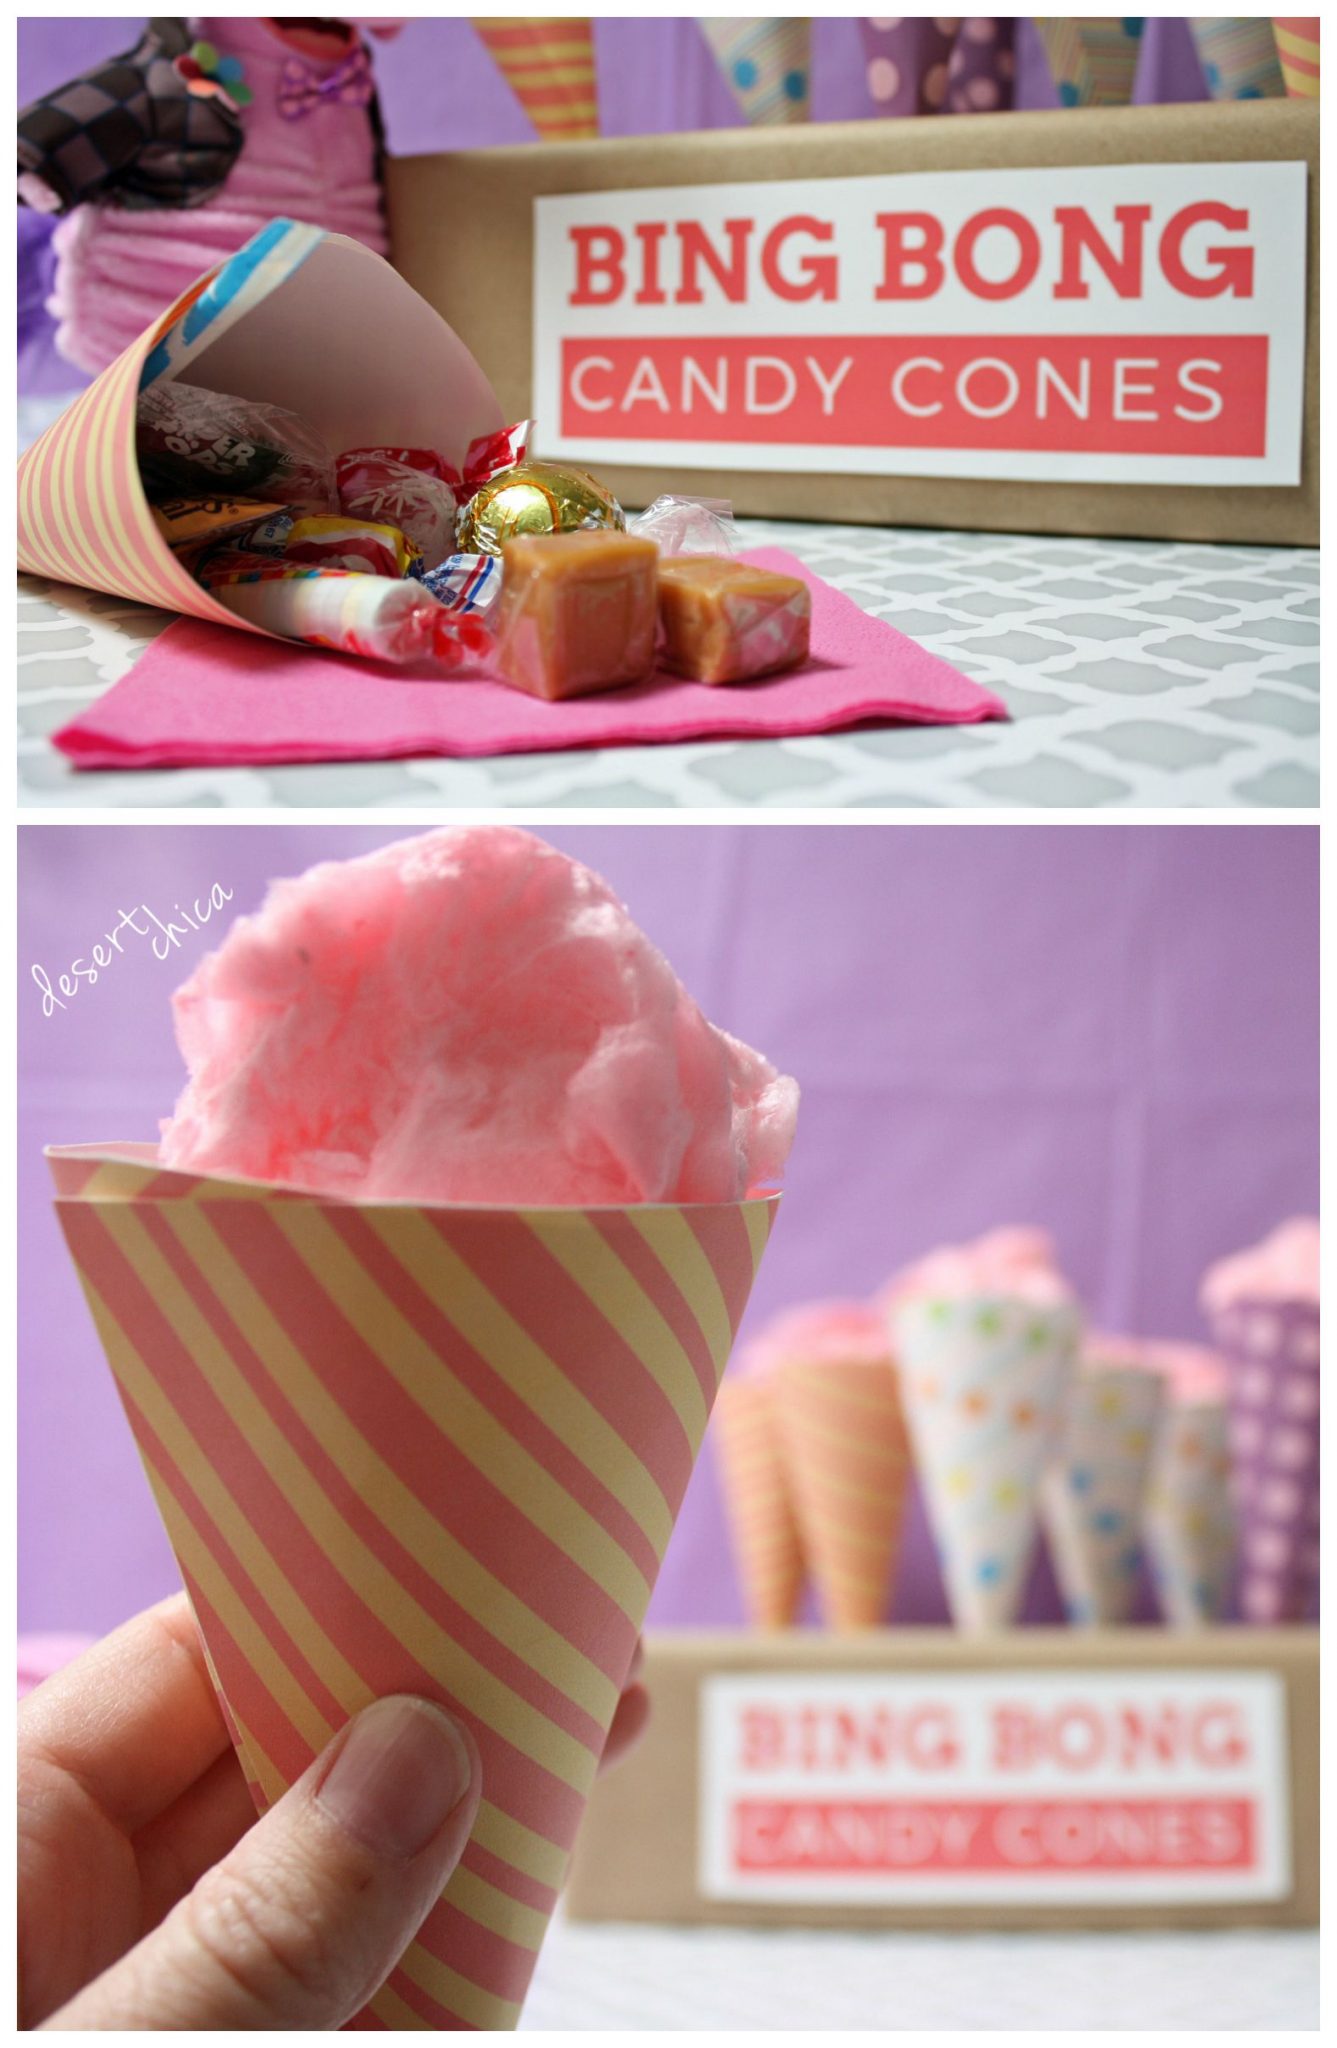 Bing Bong Candy Cones with Cotton Candy and Caramel